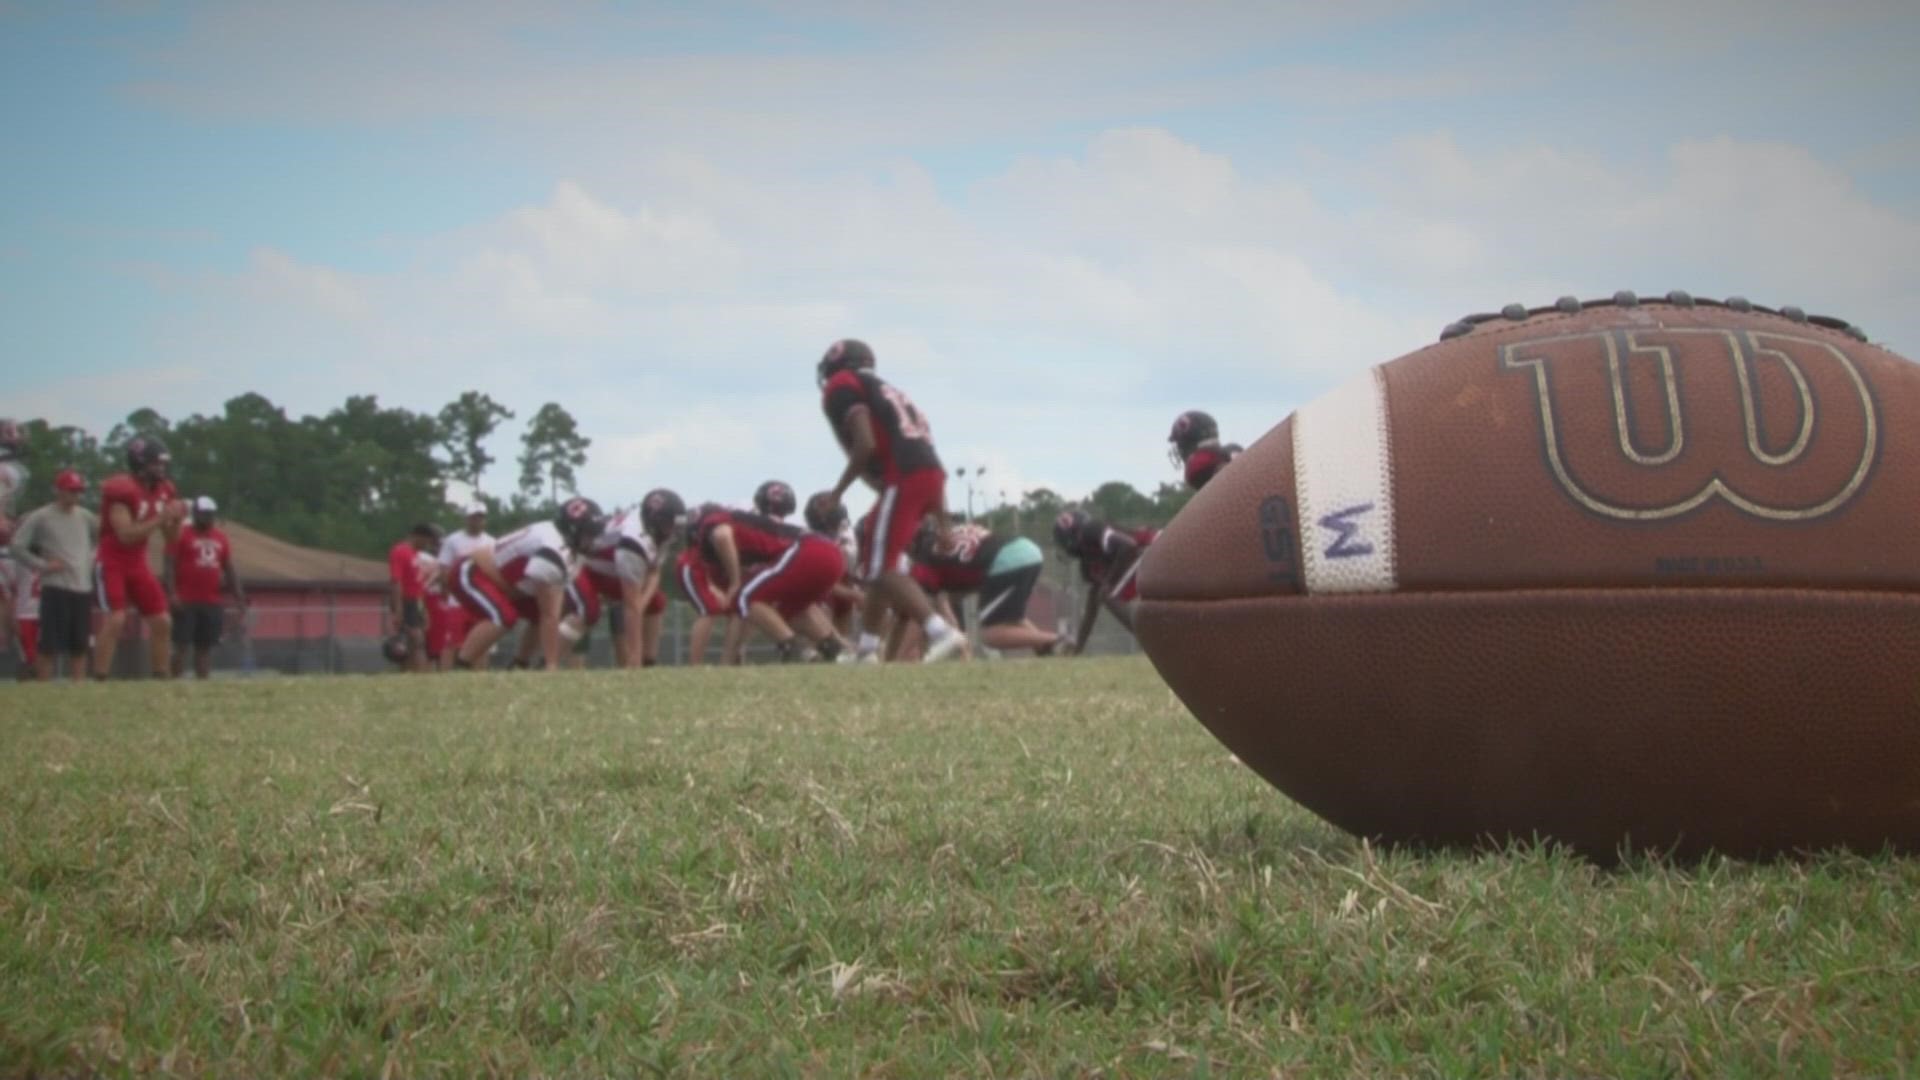 Through the up's and down's of its best season since 2010, the Middleburg Broncos have continued to, as their nickname suggests, "#HorsePower" through.